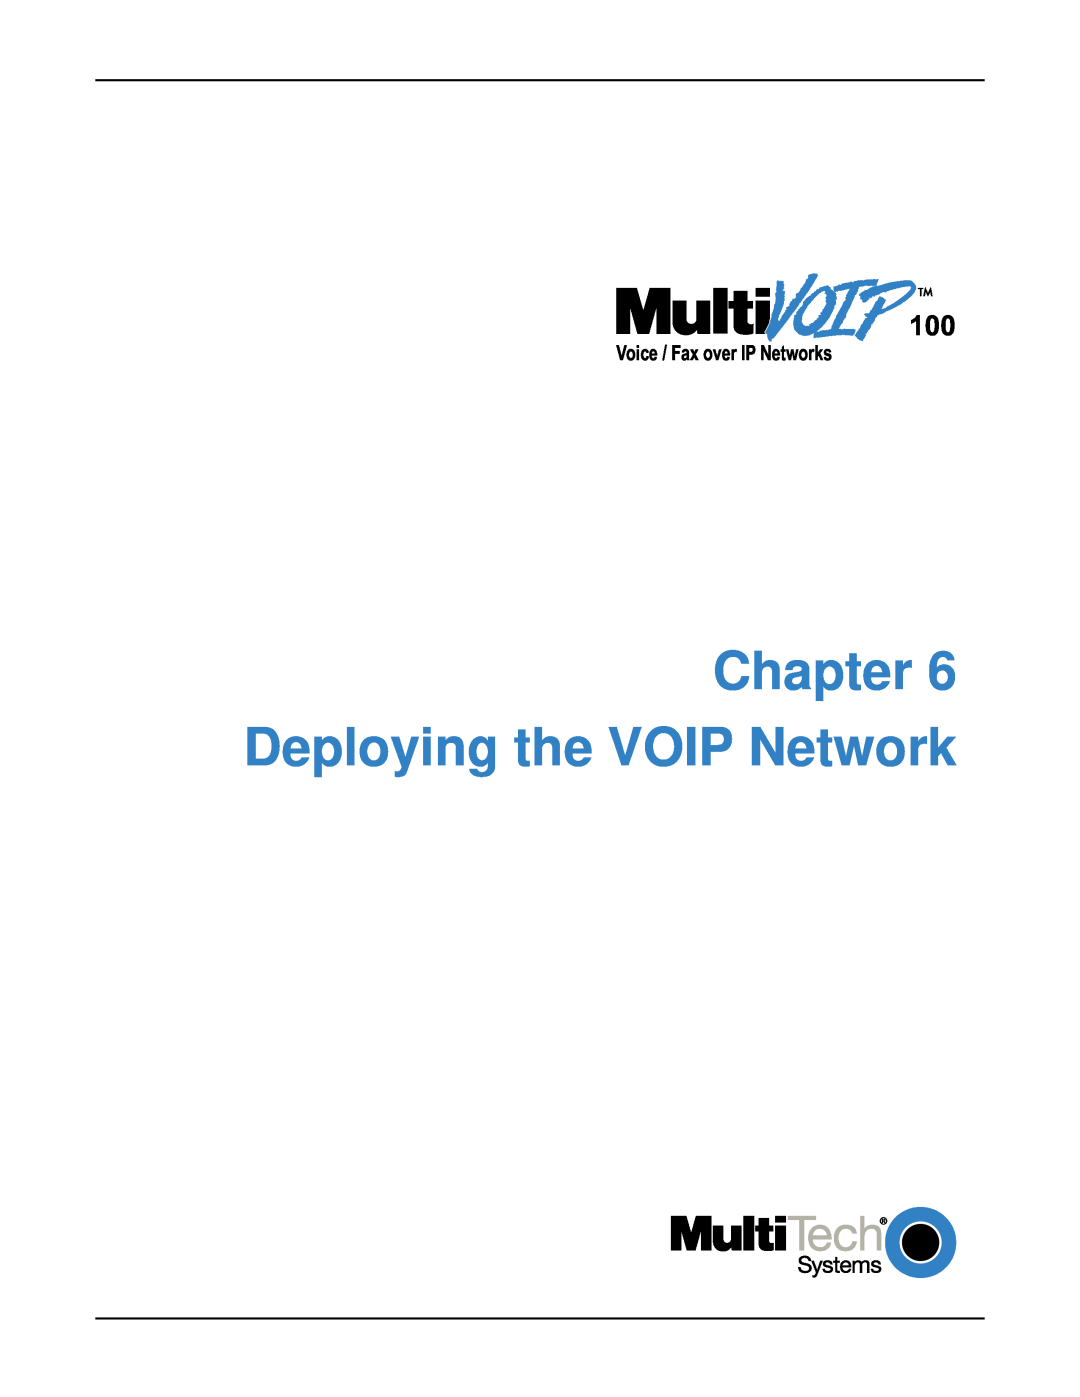 Multi-Tech Systems MVP120 manual Chapter Deploying the VOIP Network, Voice / Fax over IP Networks 